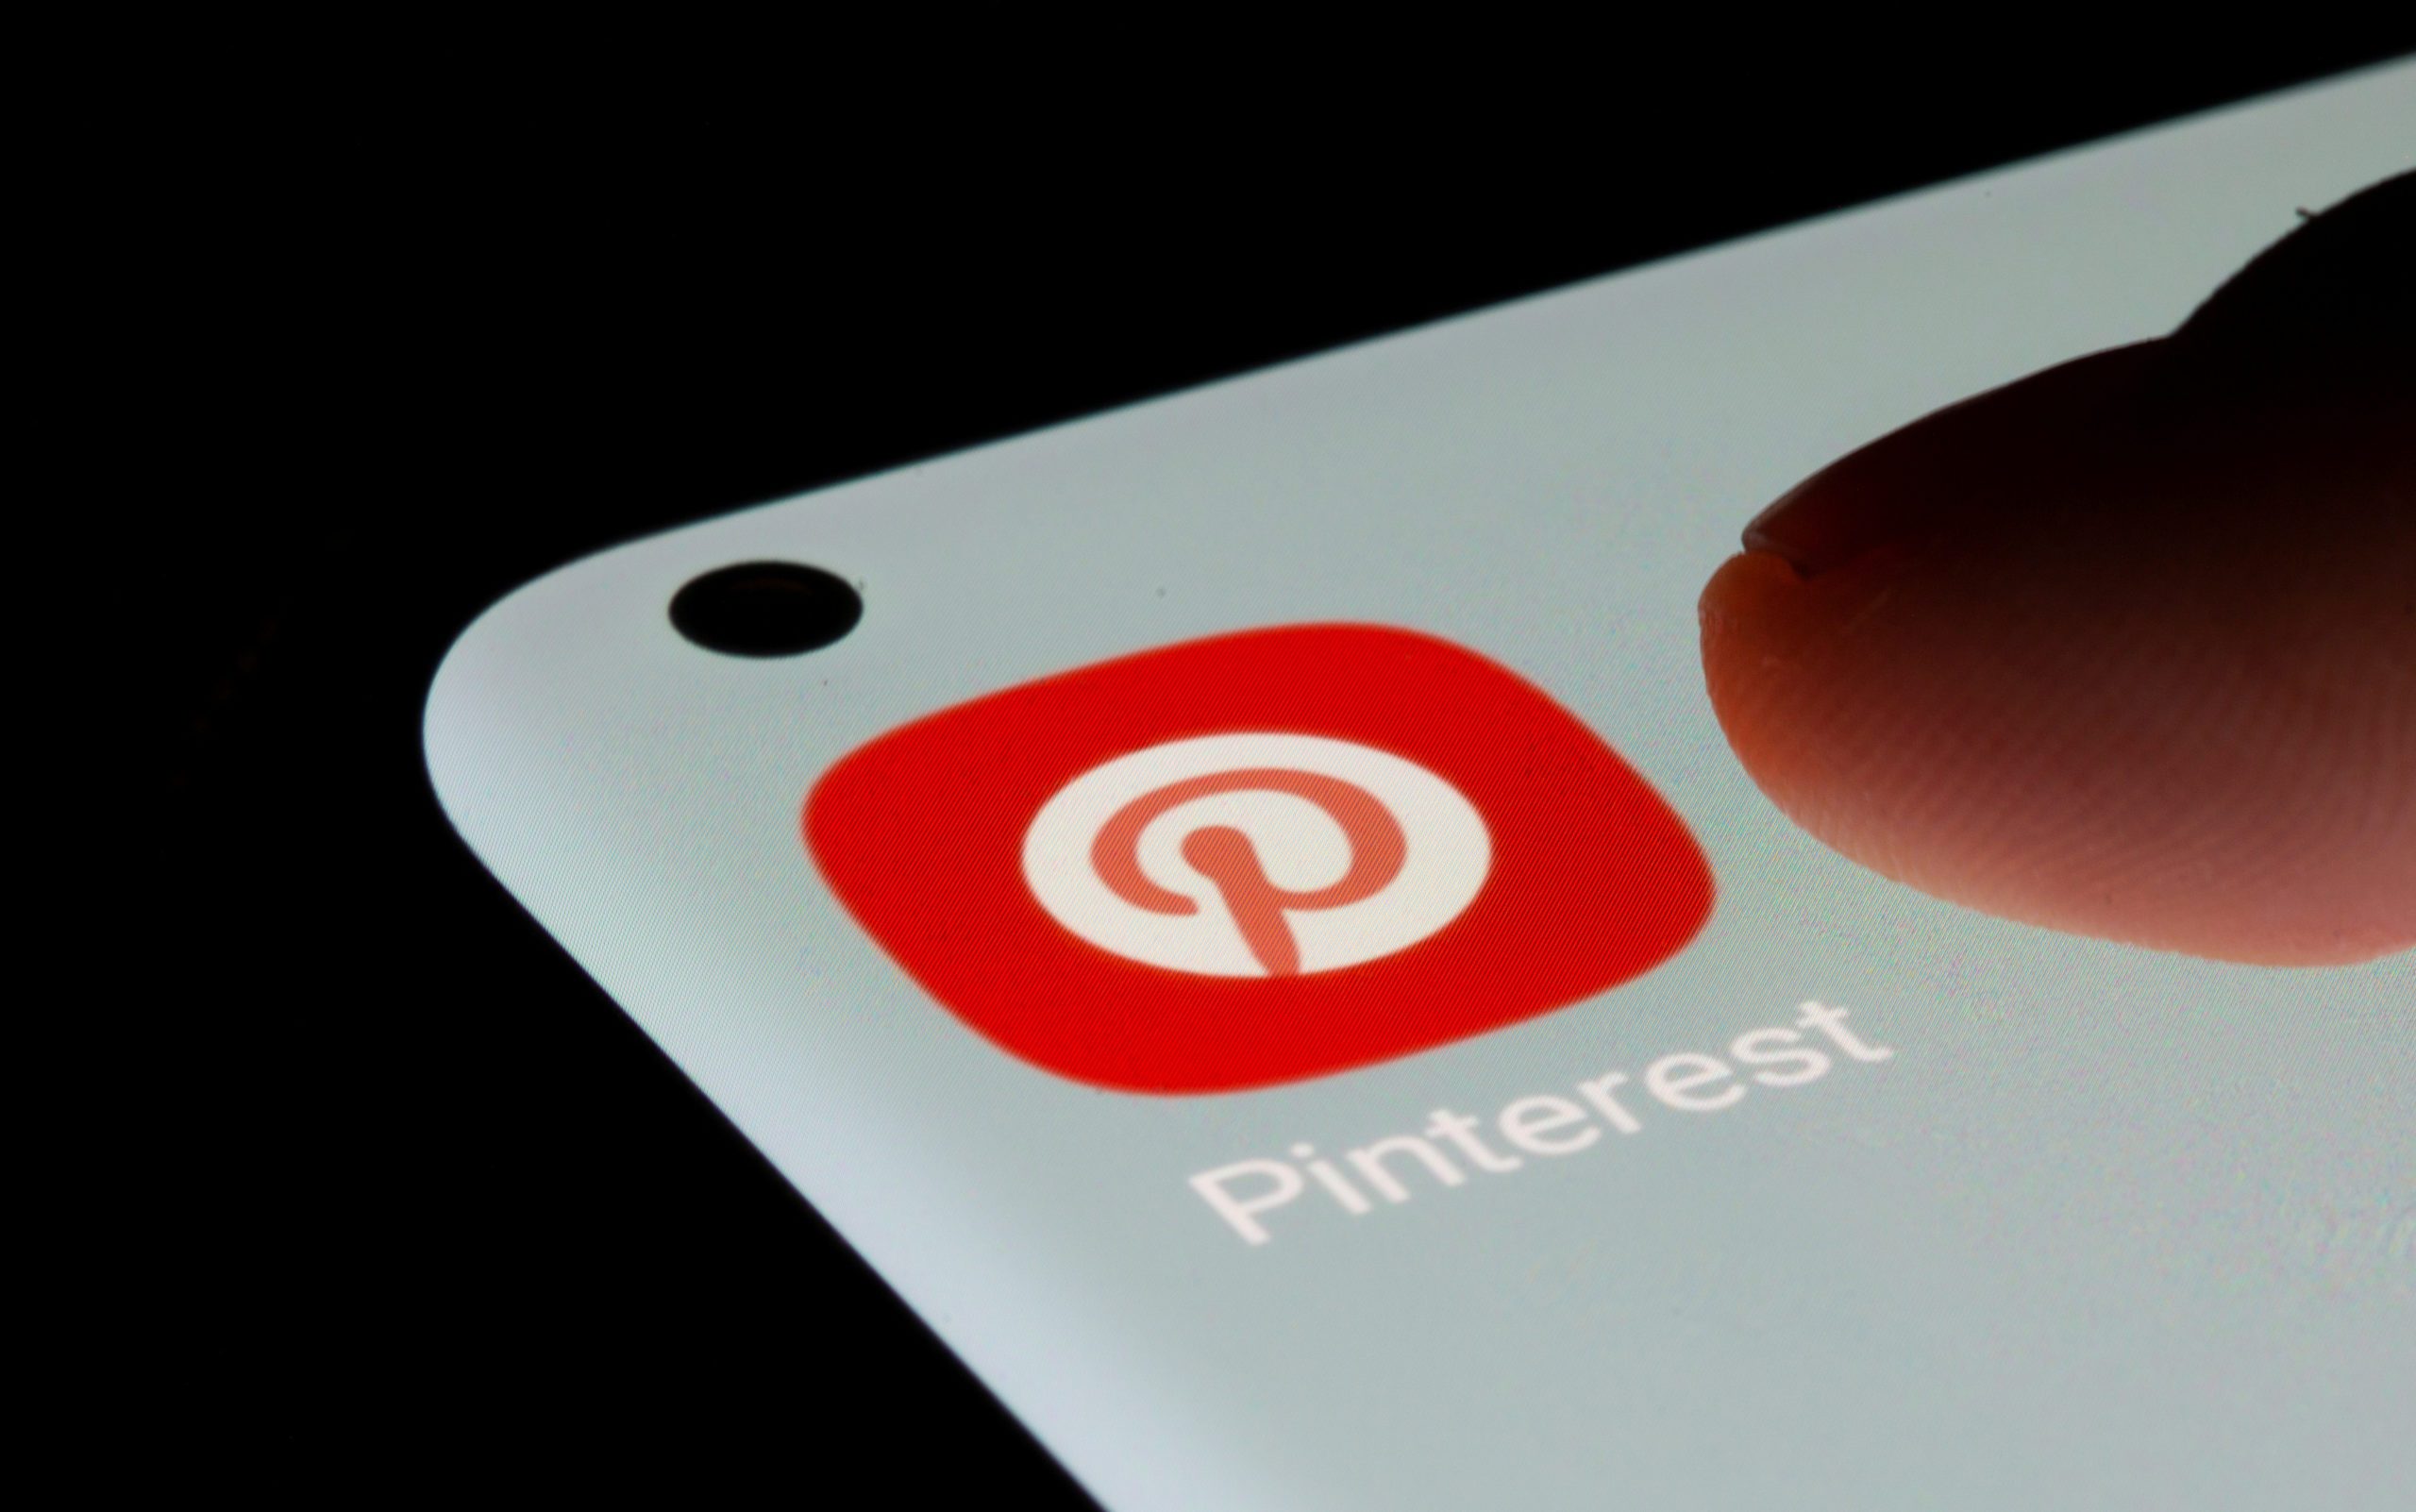 Digital search firm Pinterest cuts about 150 jobs